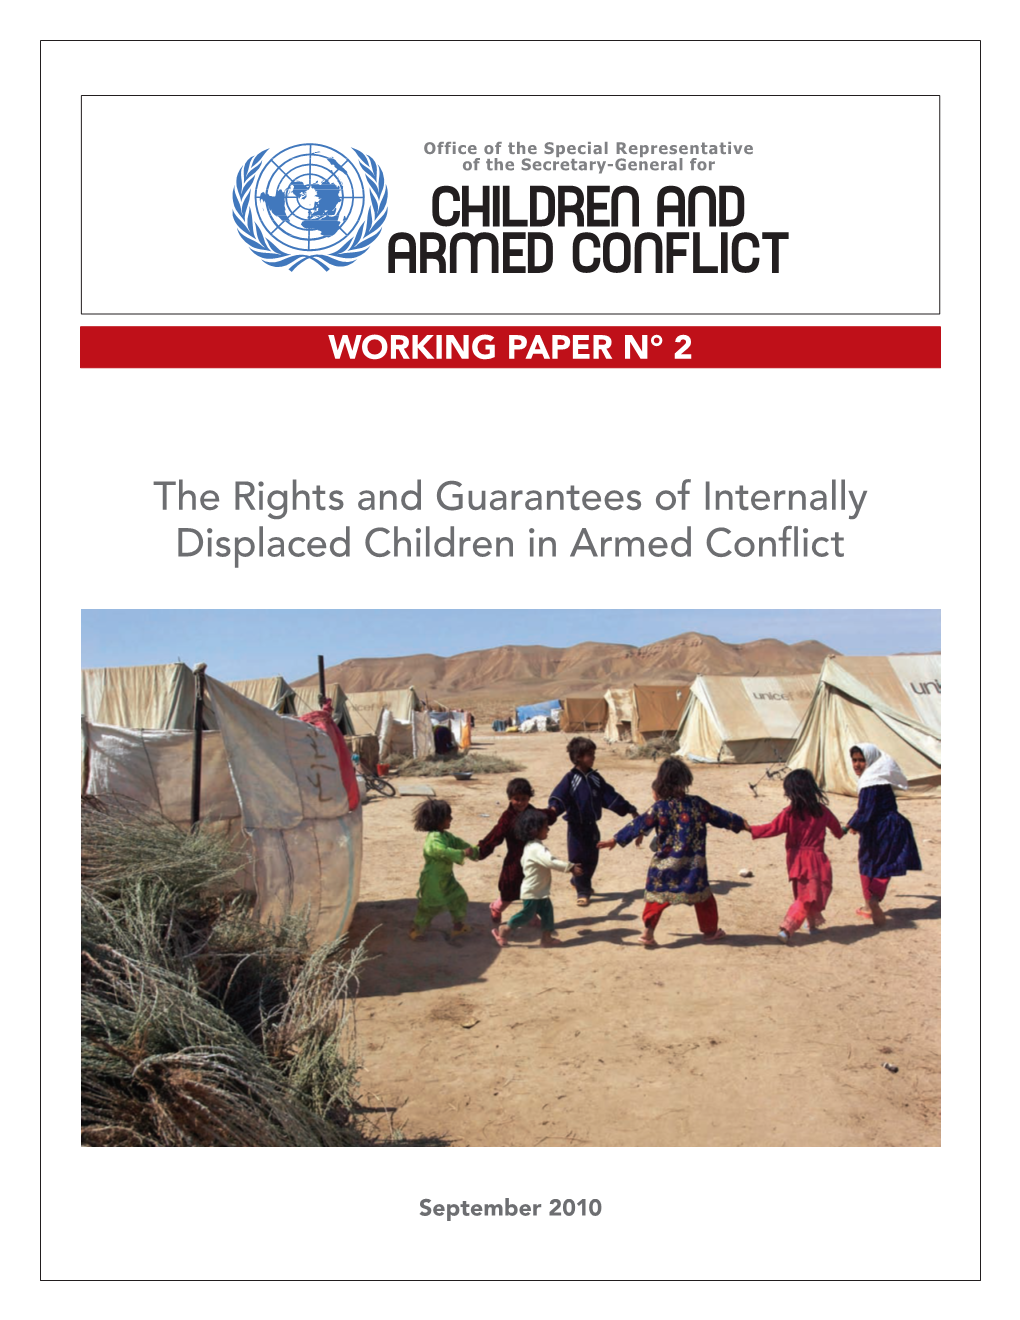 The Rights and Guarantees of Internally Displaced Children in Armed Conflict